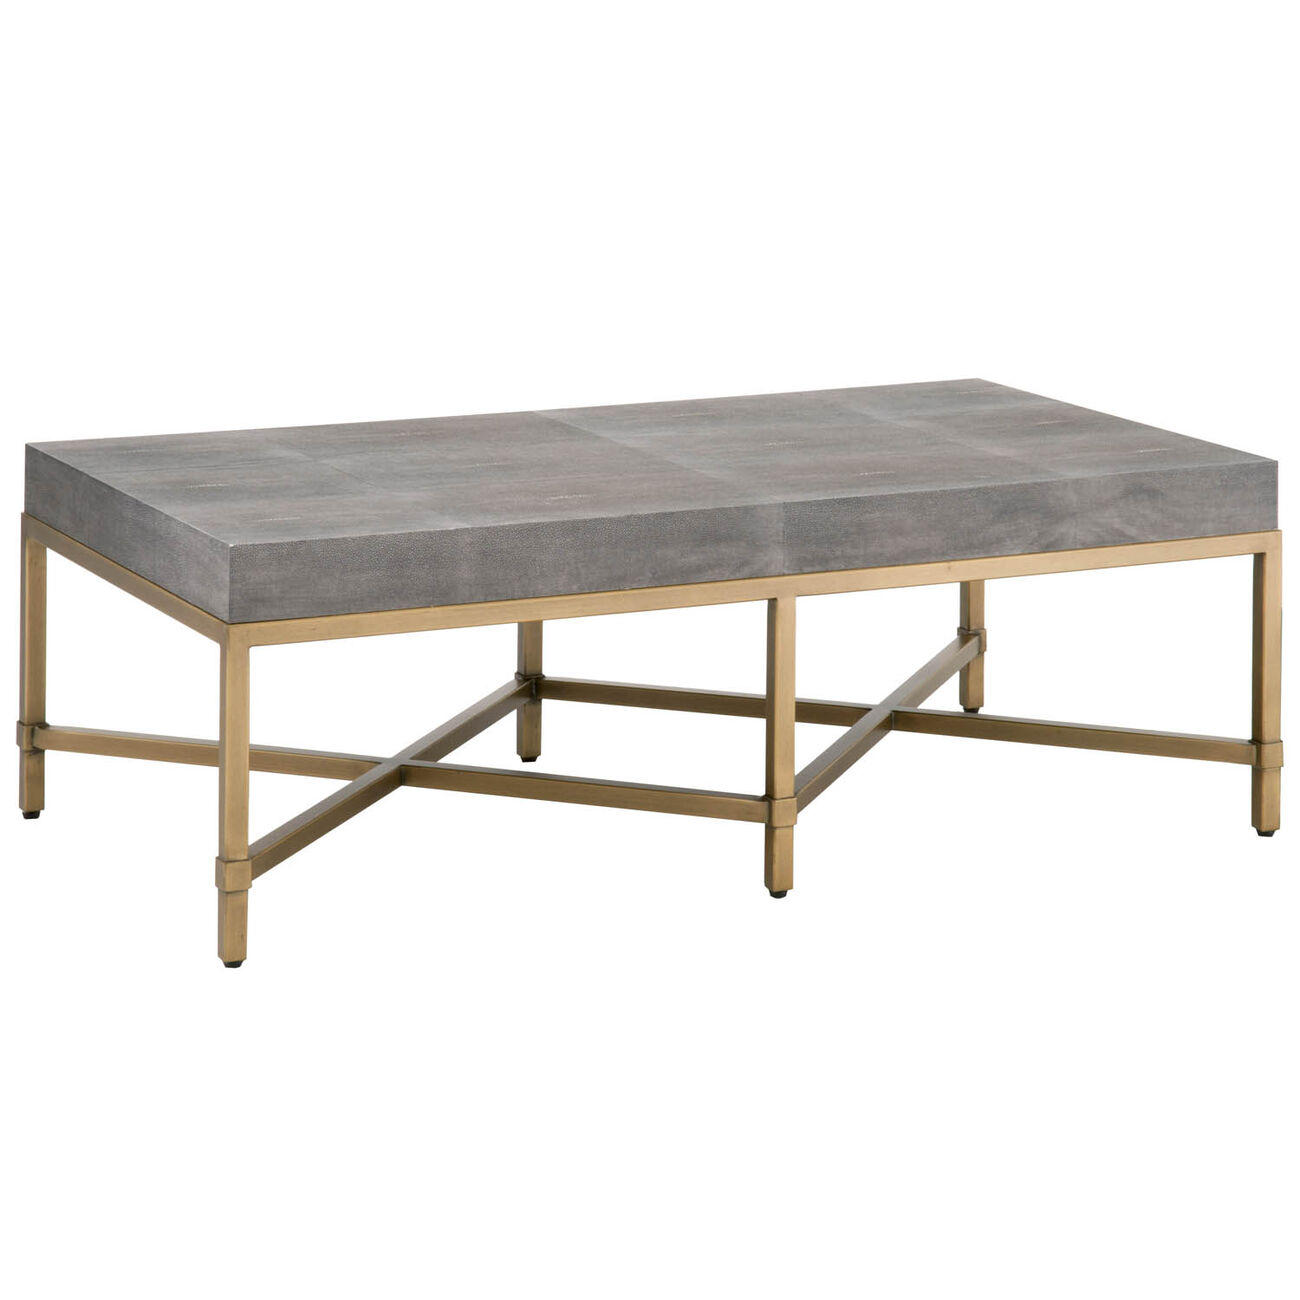 Resin Top Rectangular Coffee Table With Metal Base, Gray And Gold